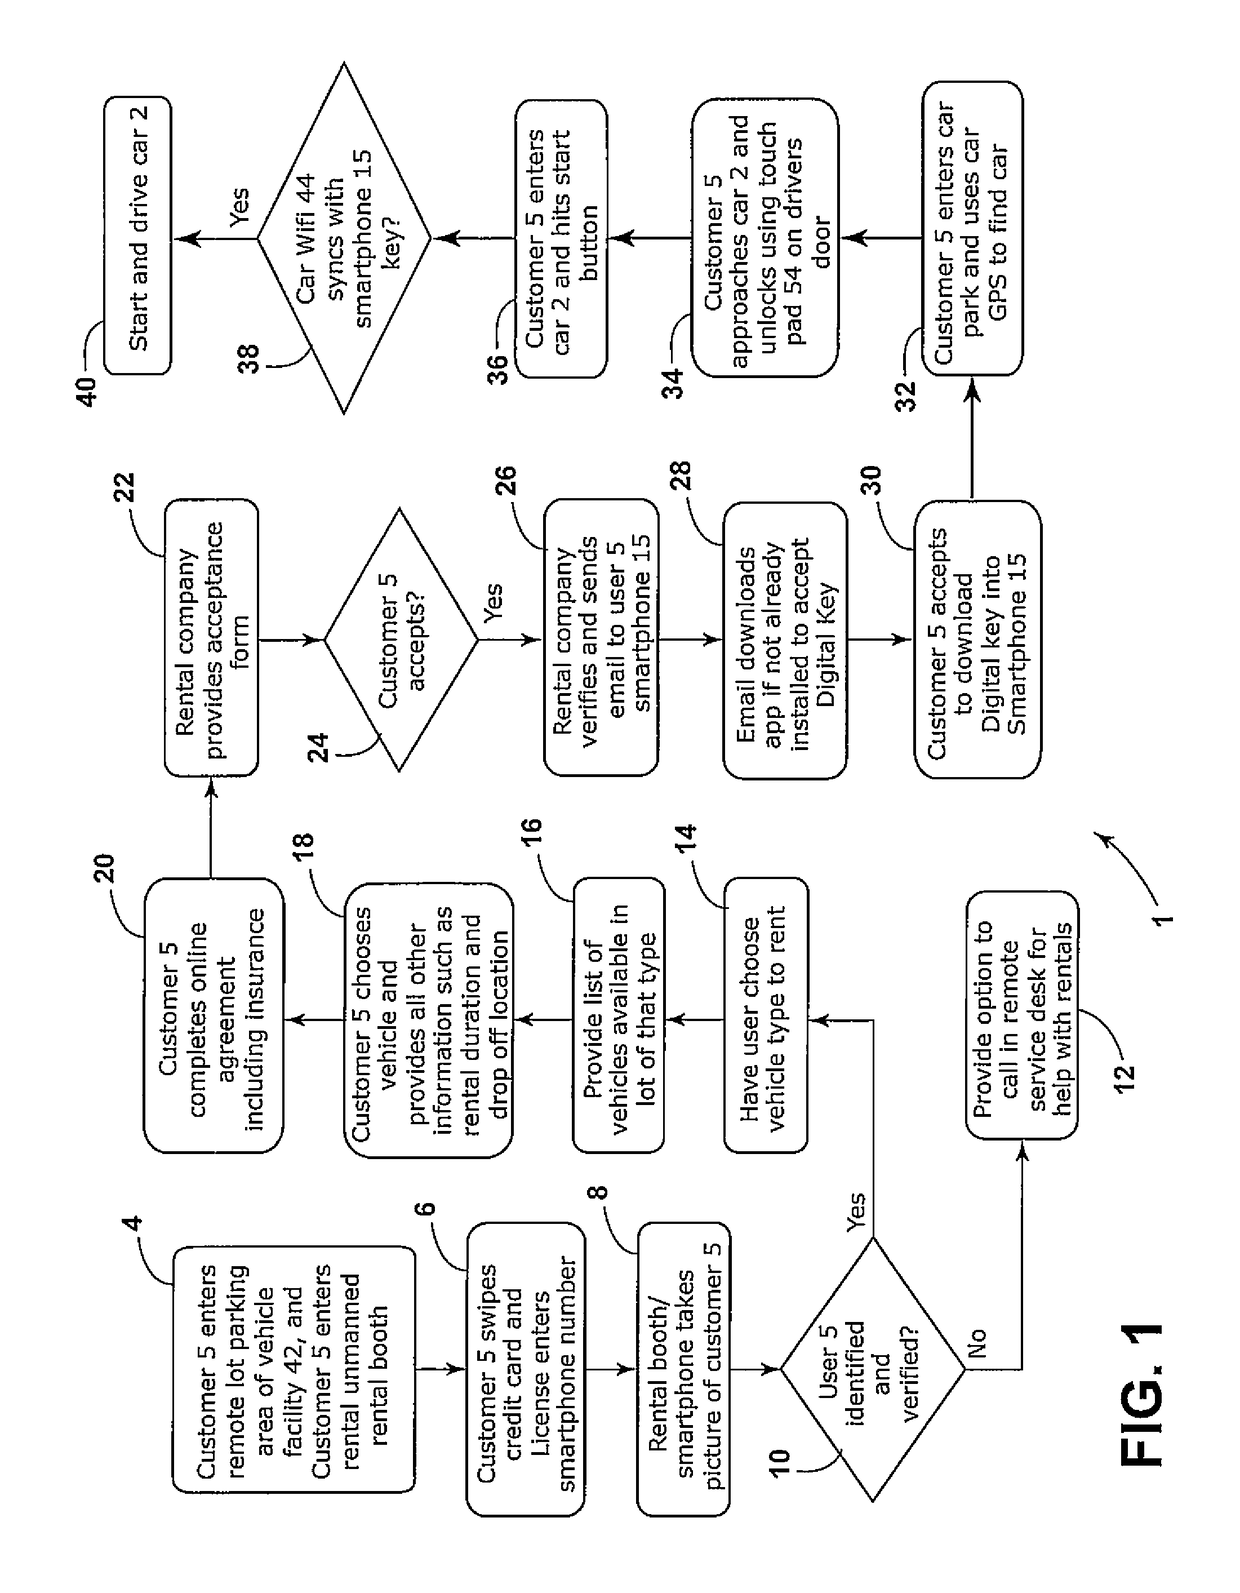 Keyless car sharing mechanism using smartphones and inbuilt WiFi systems for authentication